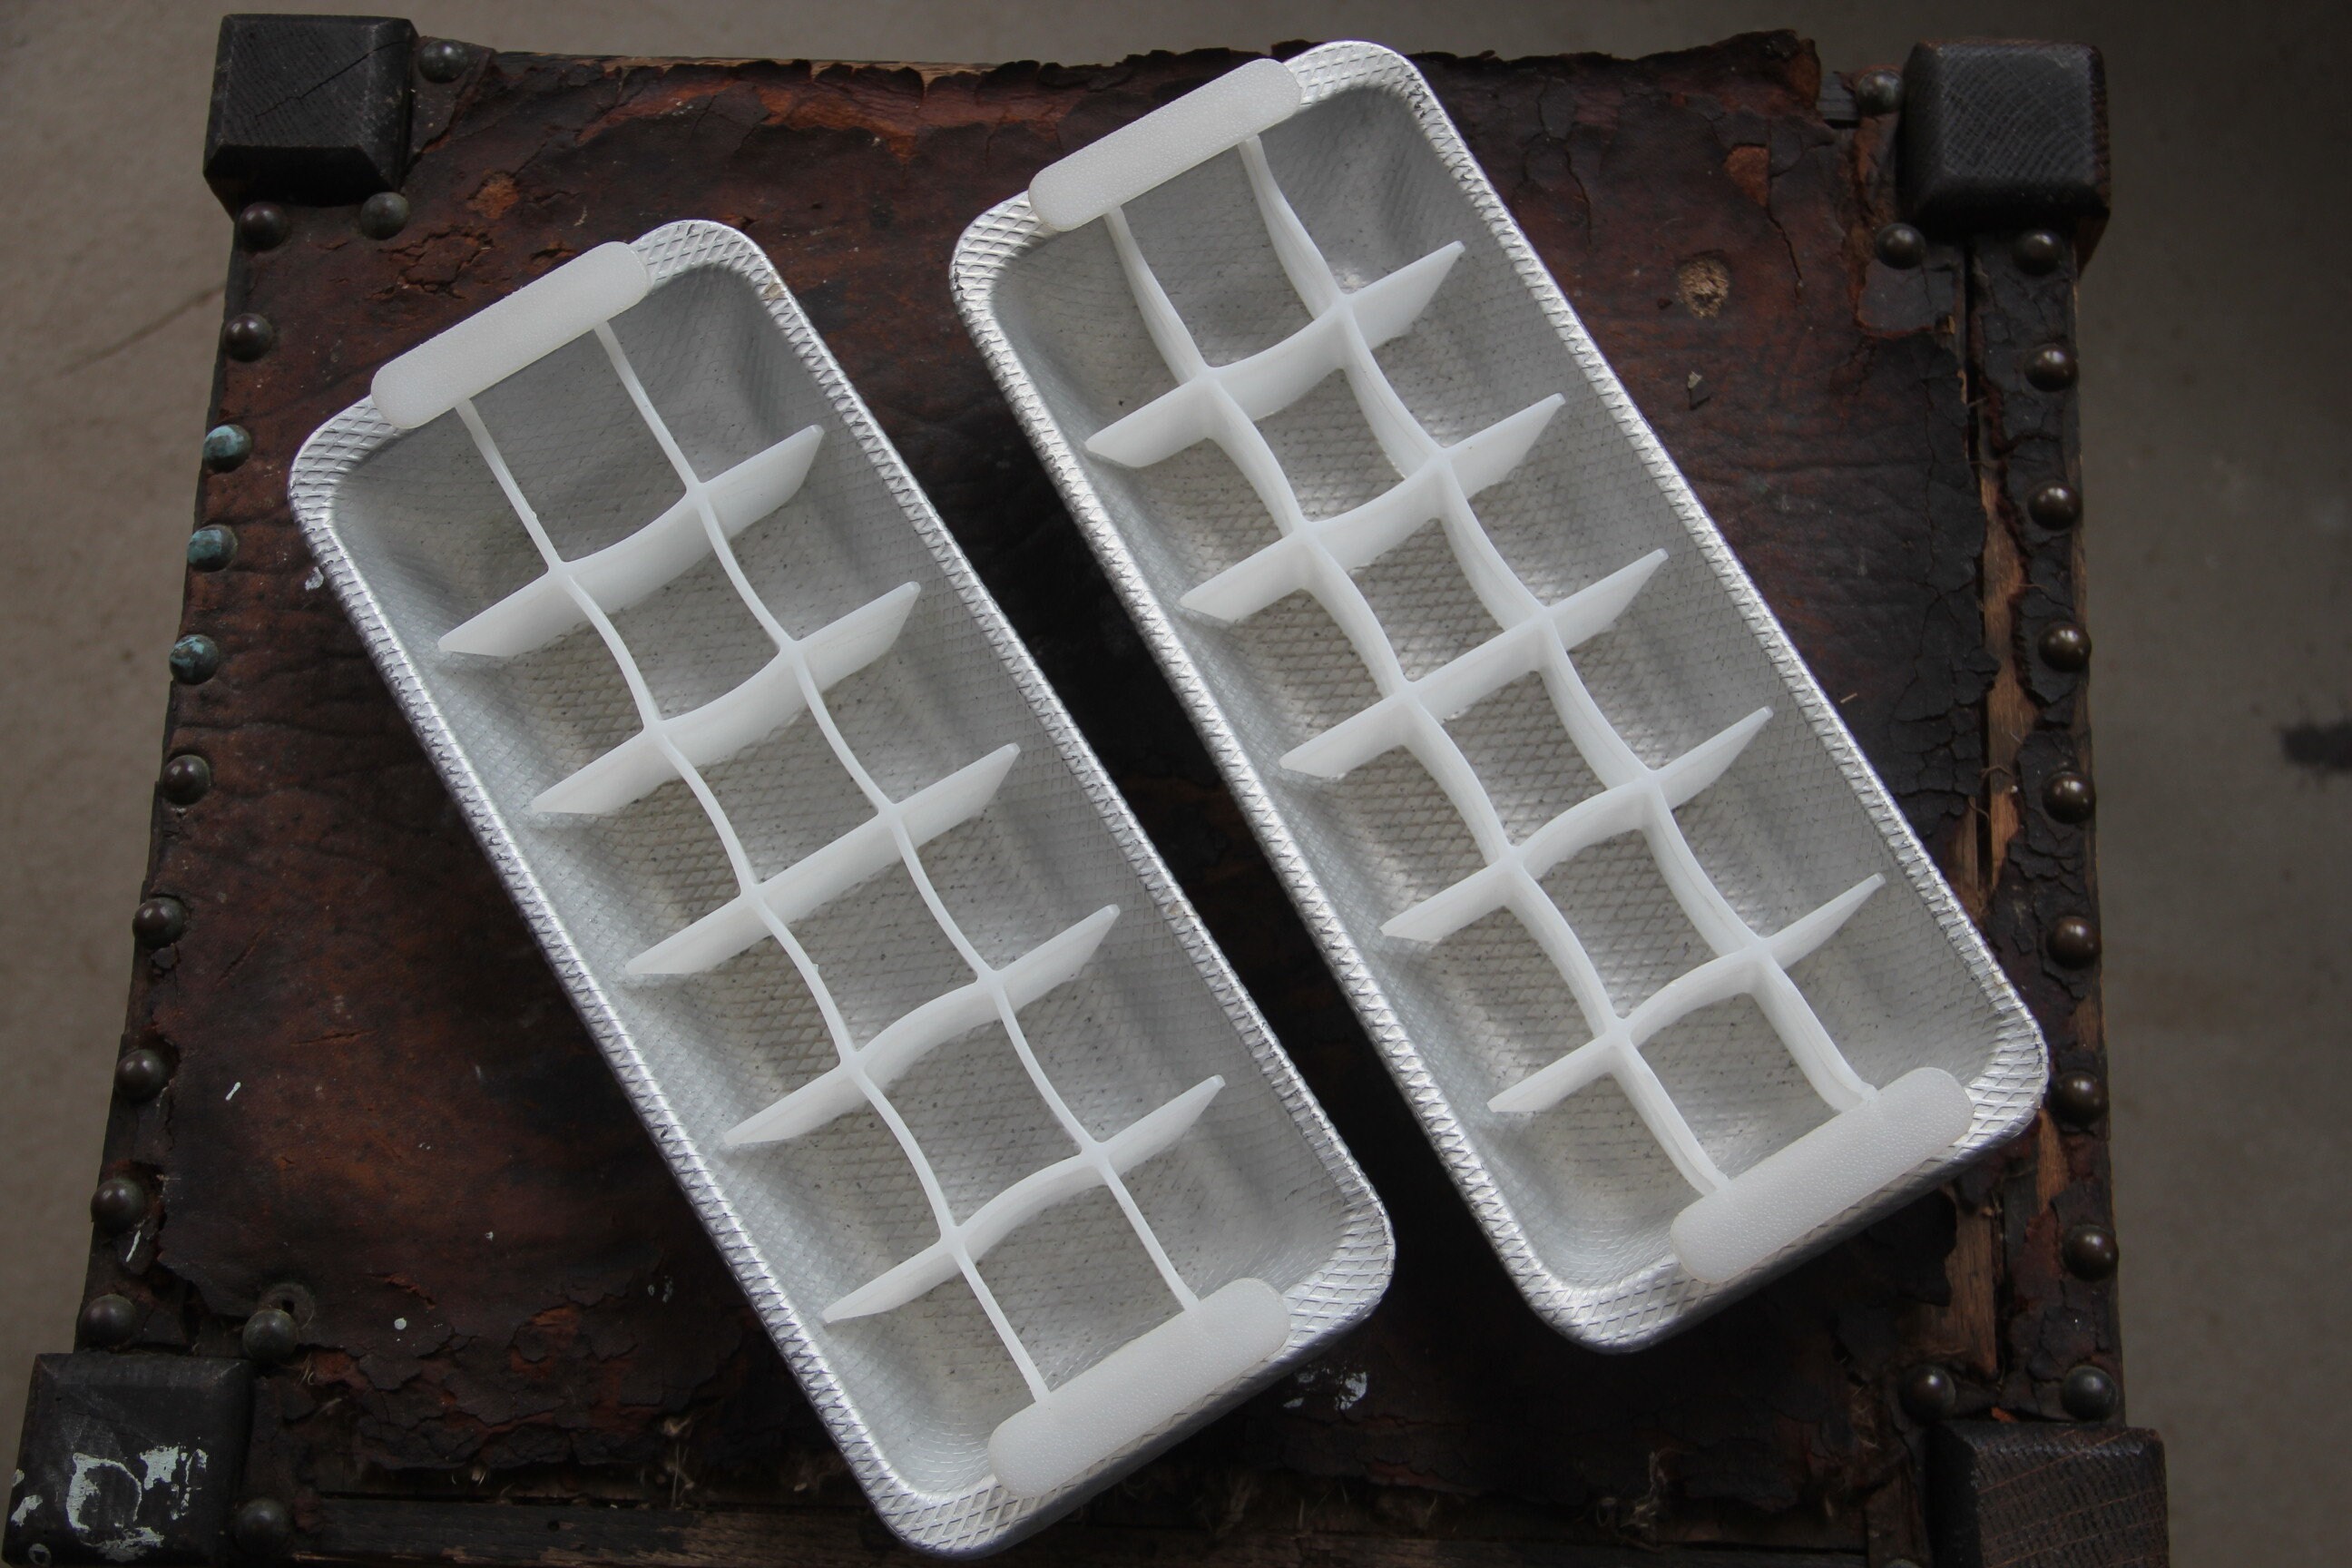 Vintage Set Of 2 Aluminum Ice Cube Tray 11 1/8 Long Dimpled Textured Tray